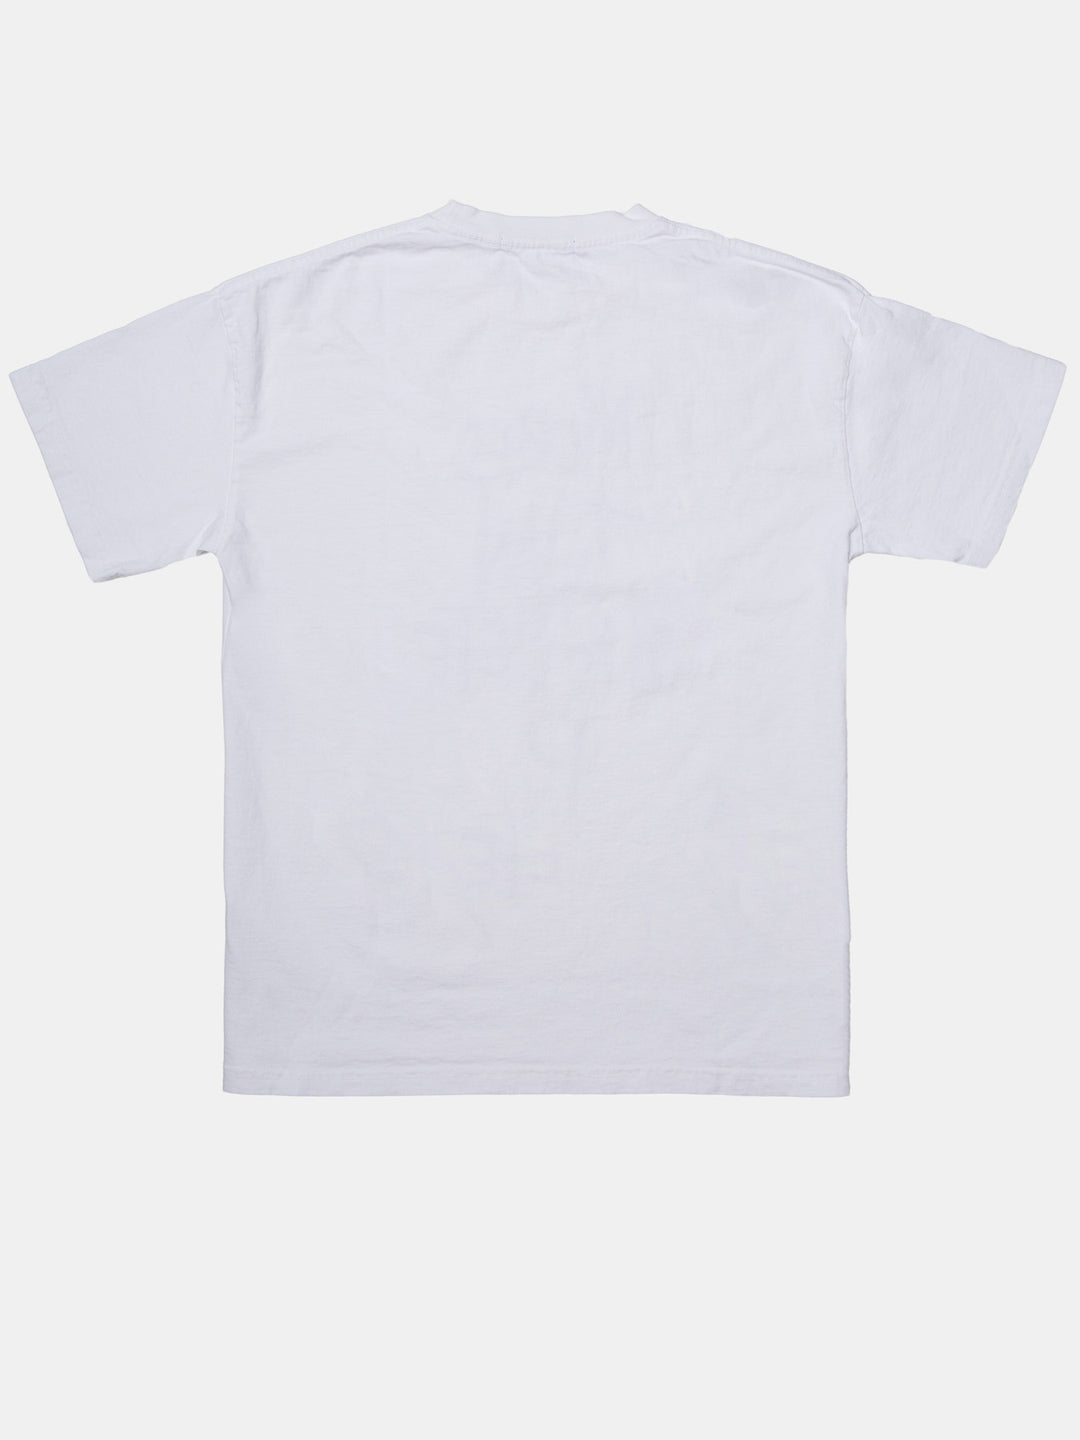 More Than An Athlete Venice Tee White - blank back of shirt